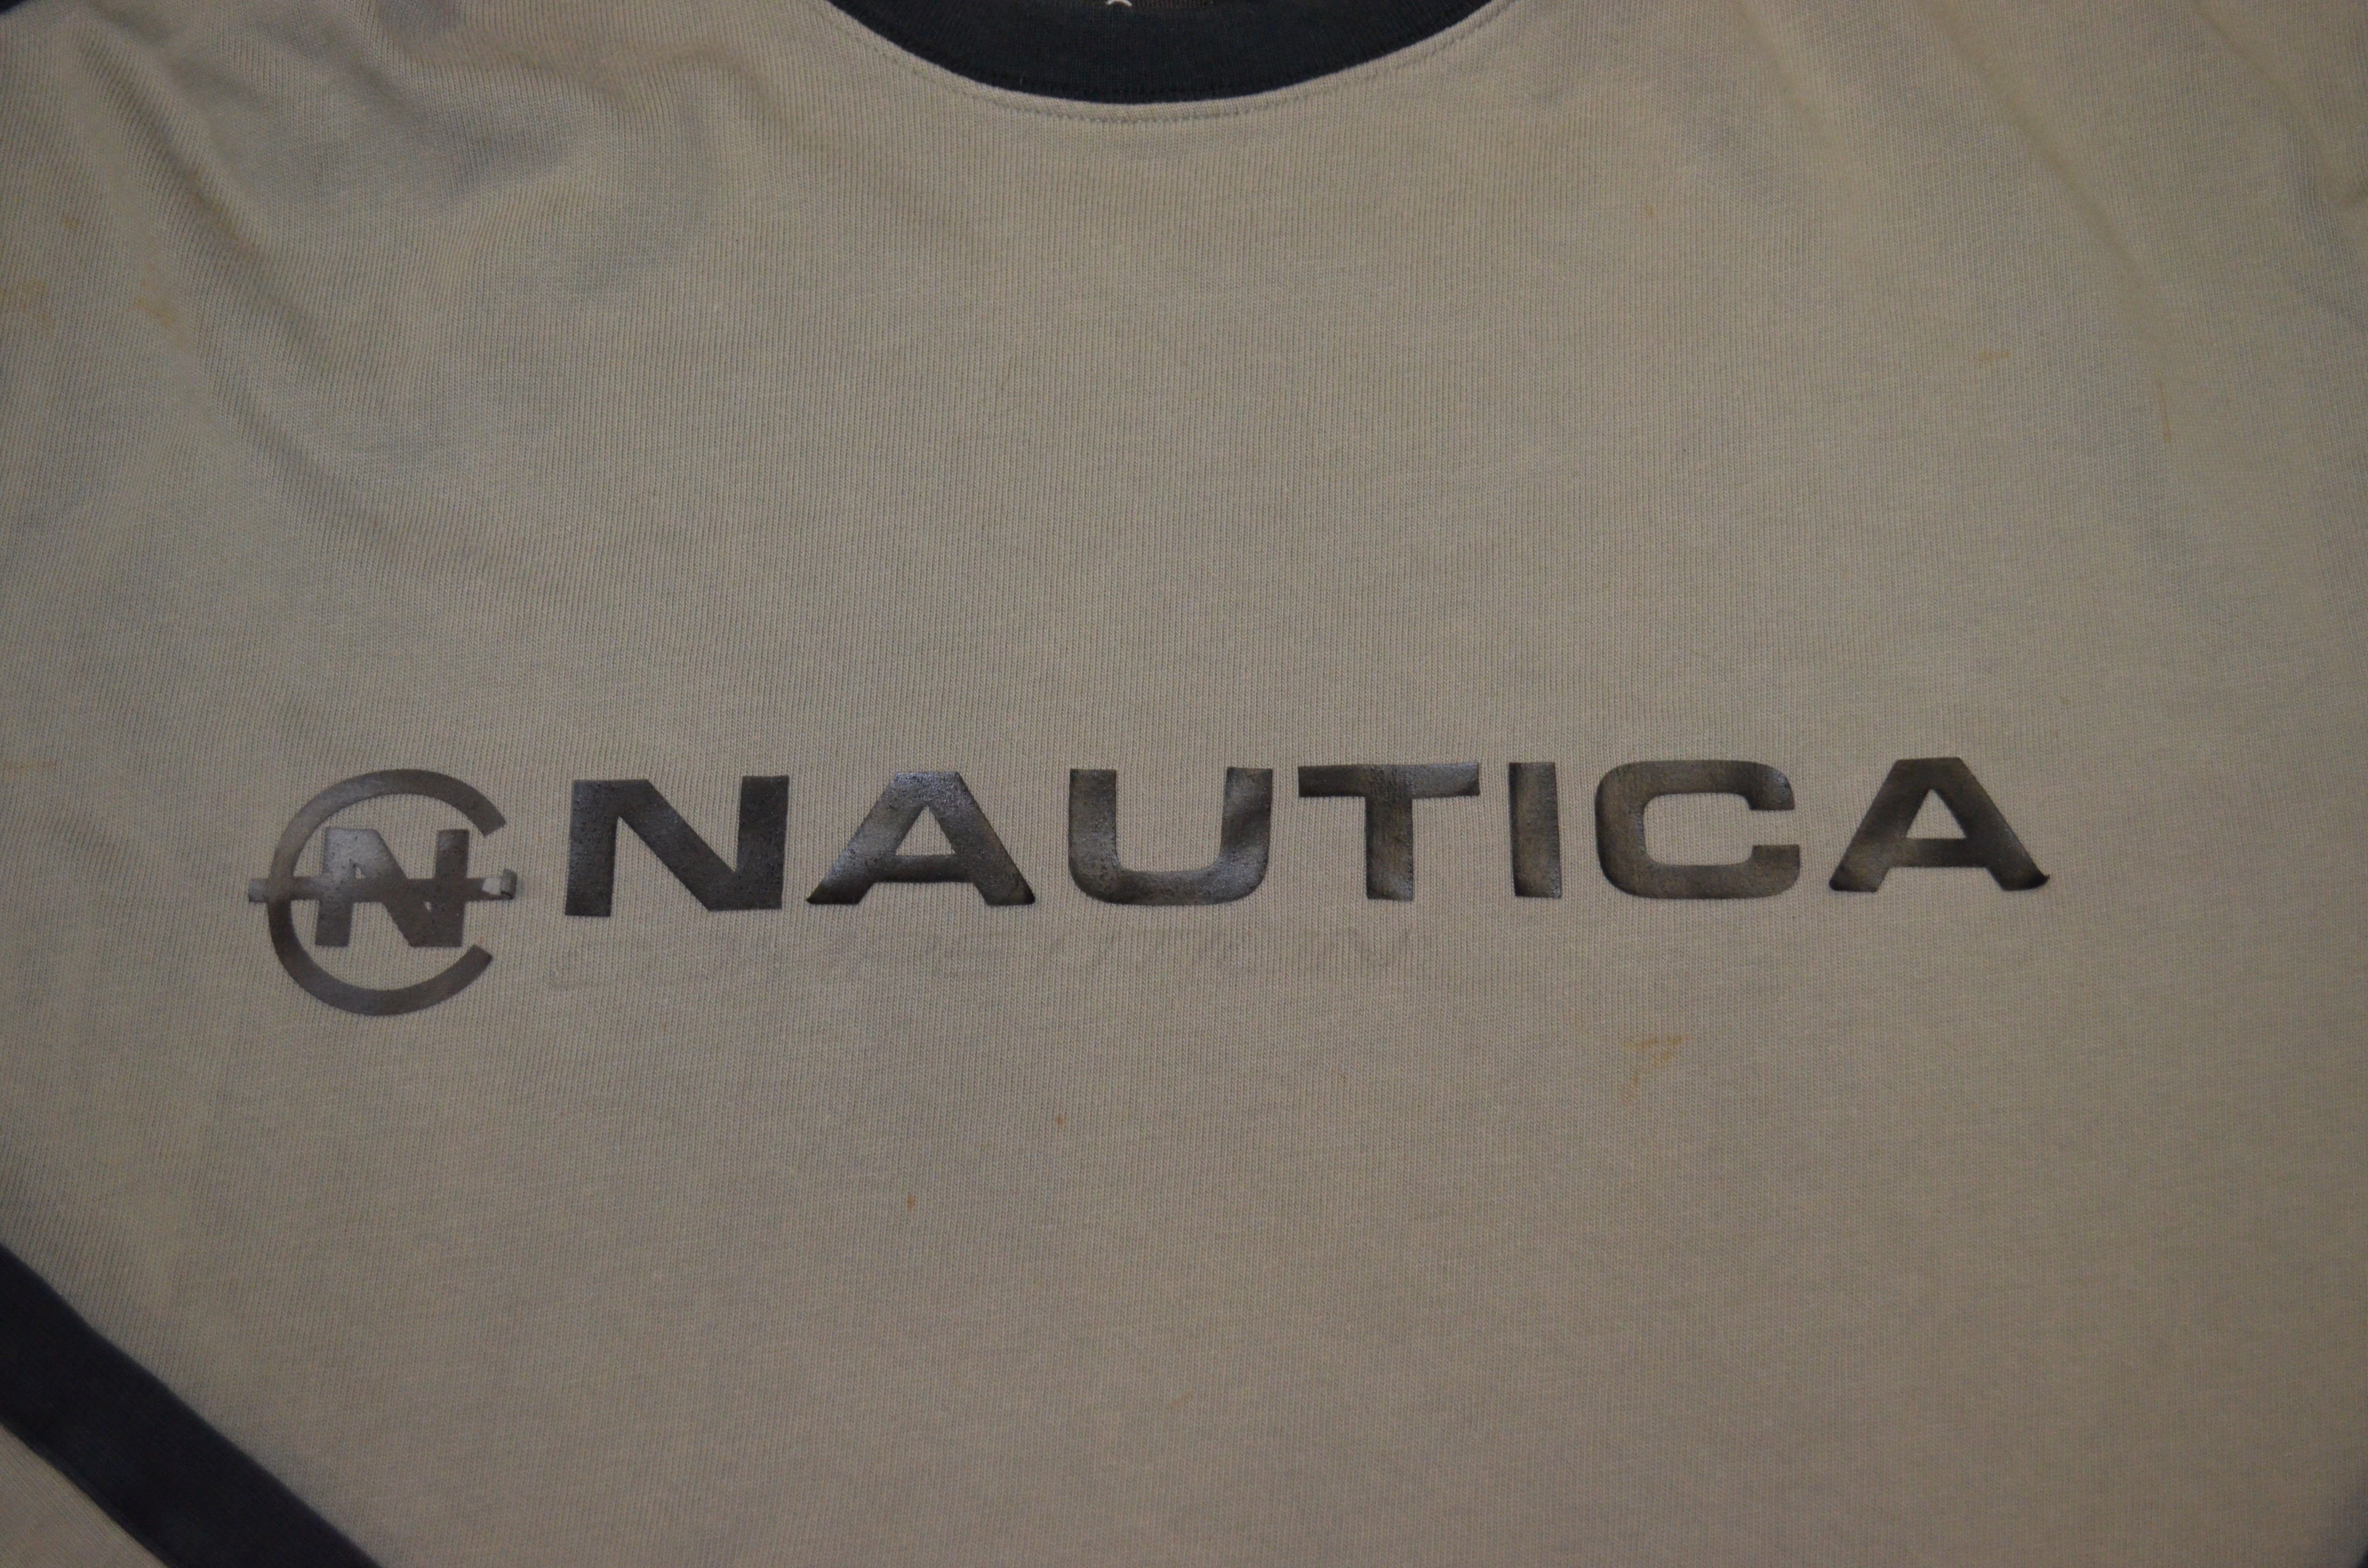 Nautica Competition Longsleeve Top (M)